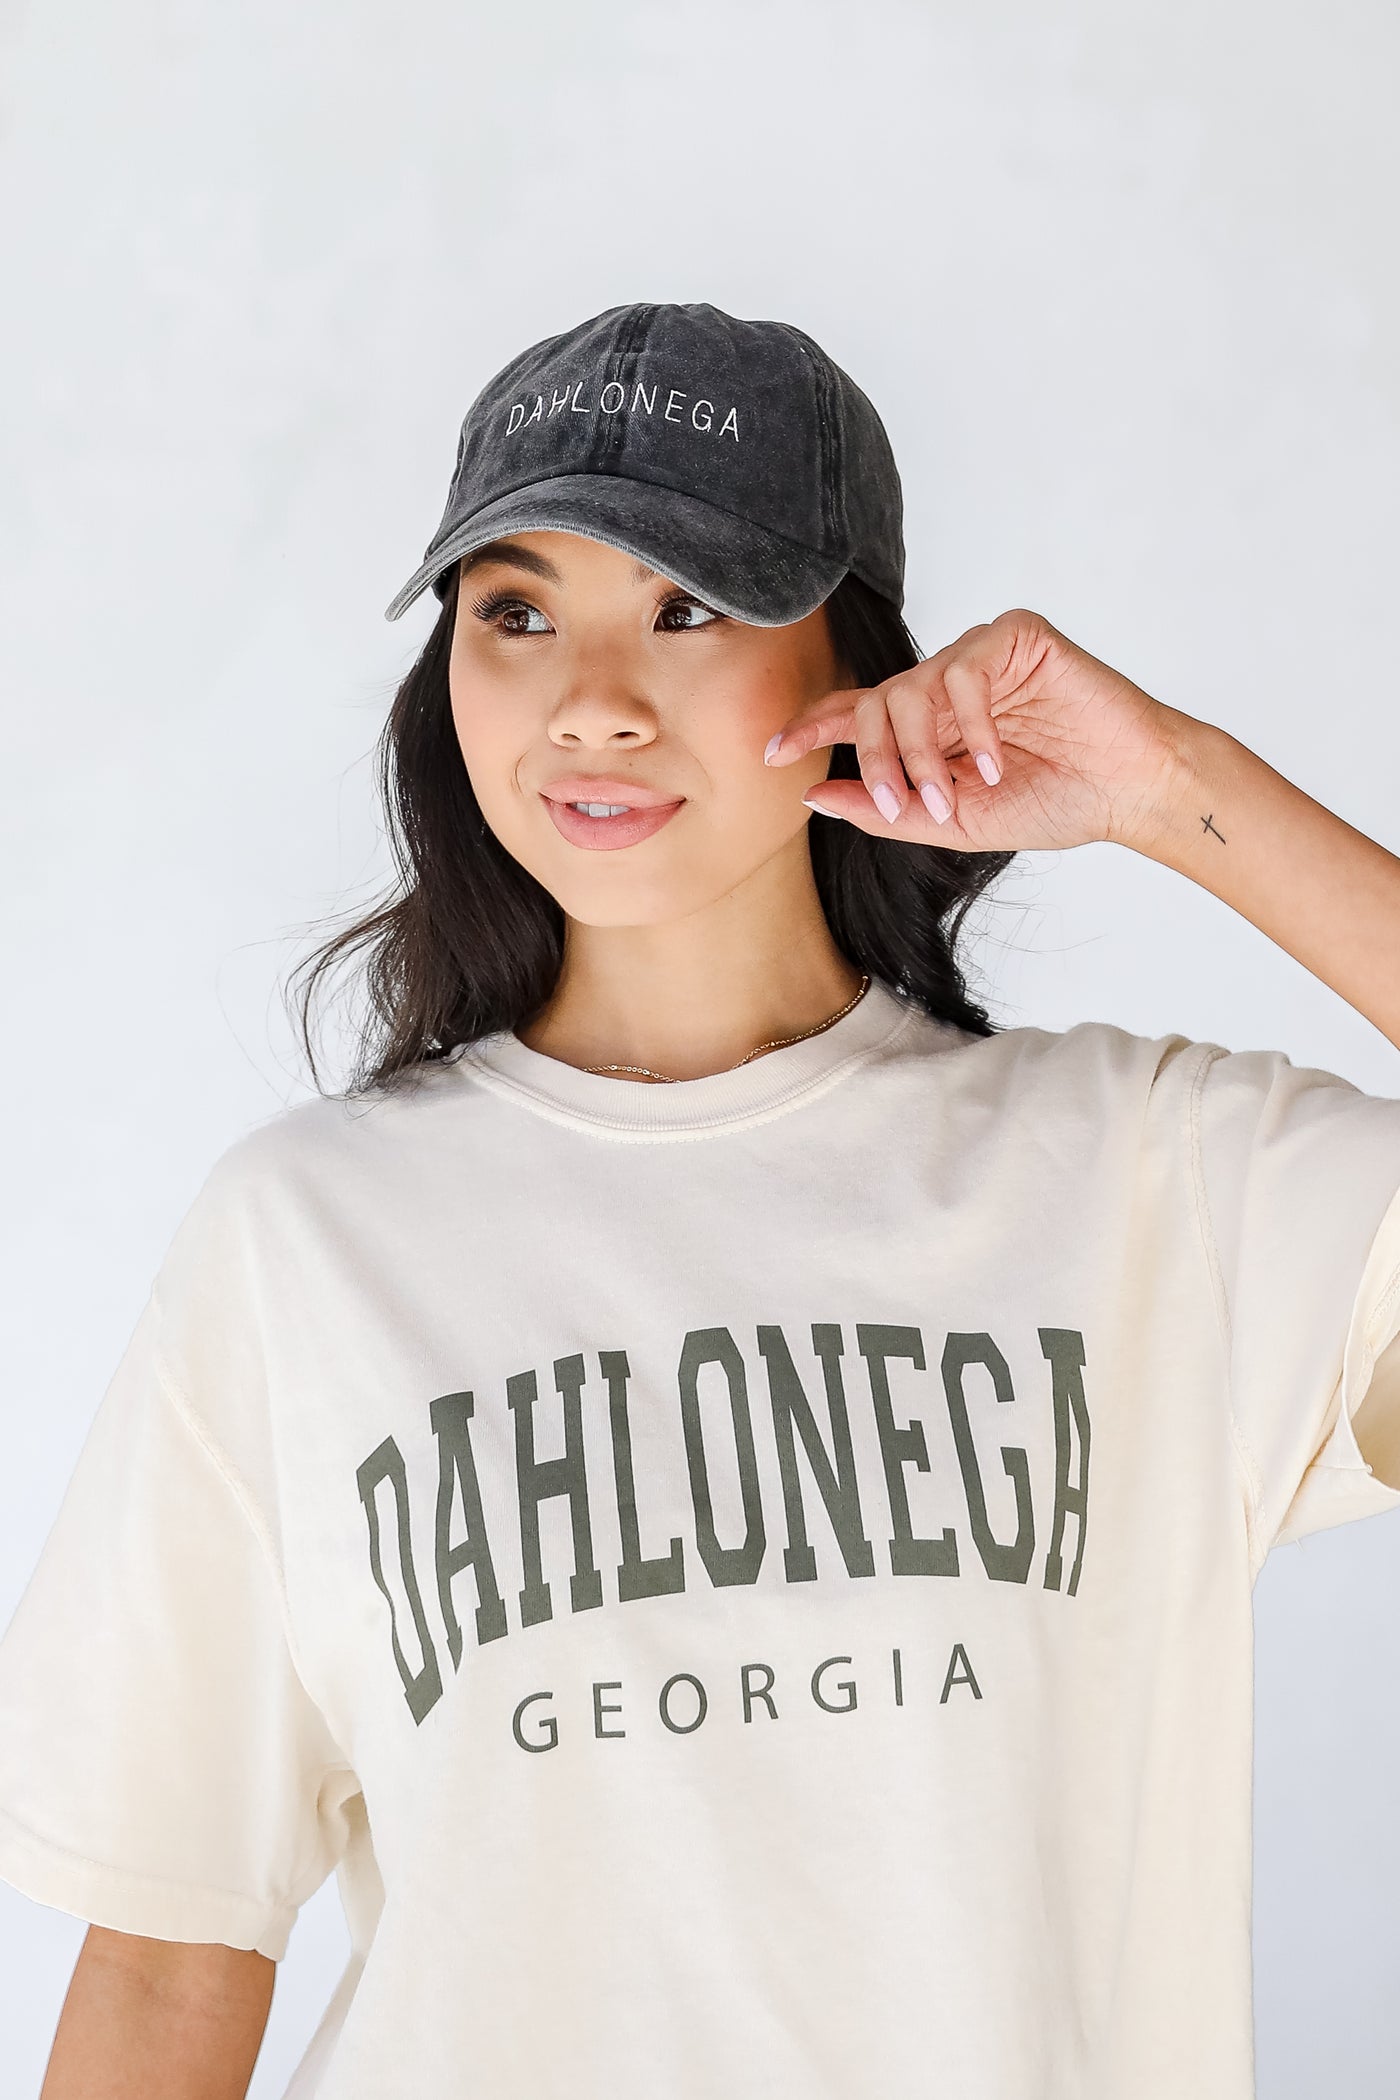 Dahlonega Embroidered Hat in black front view